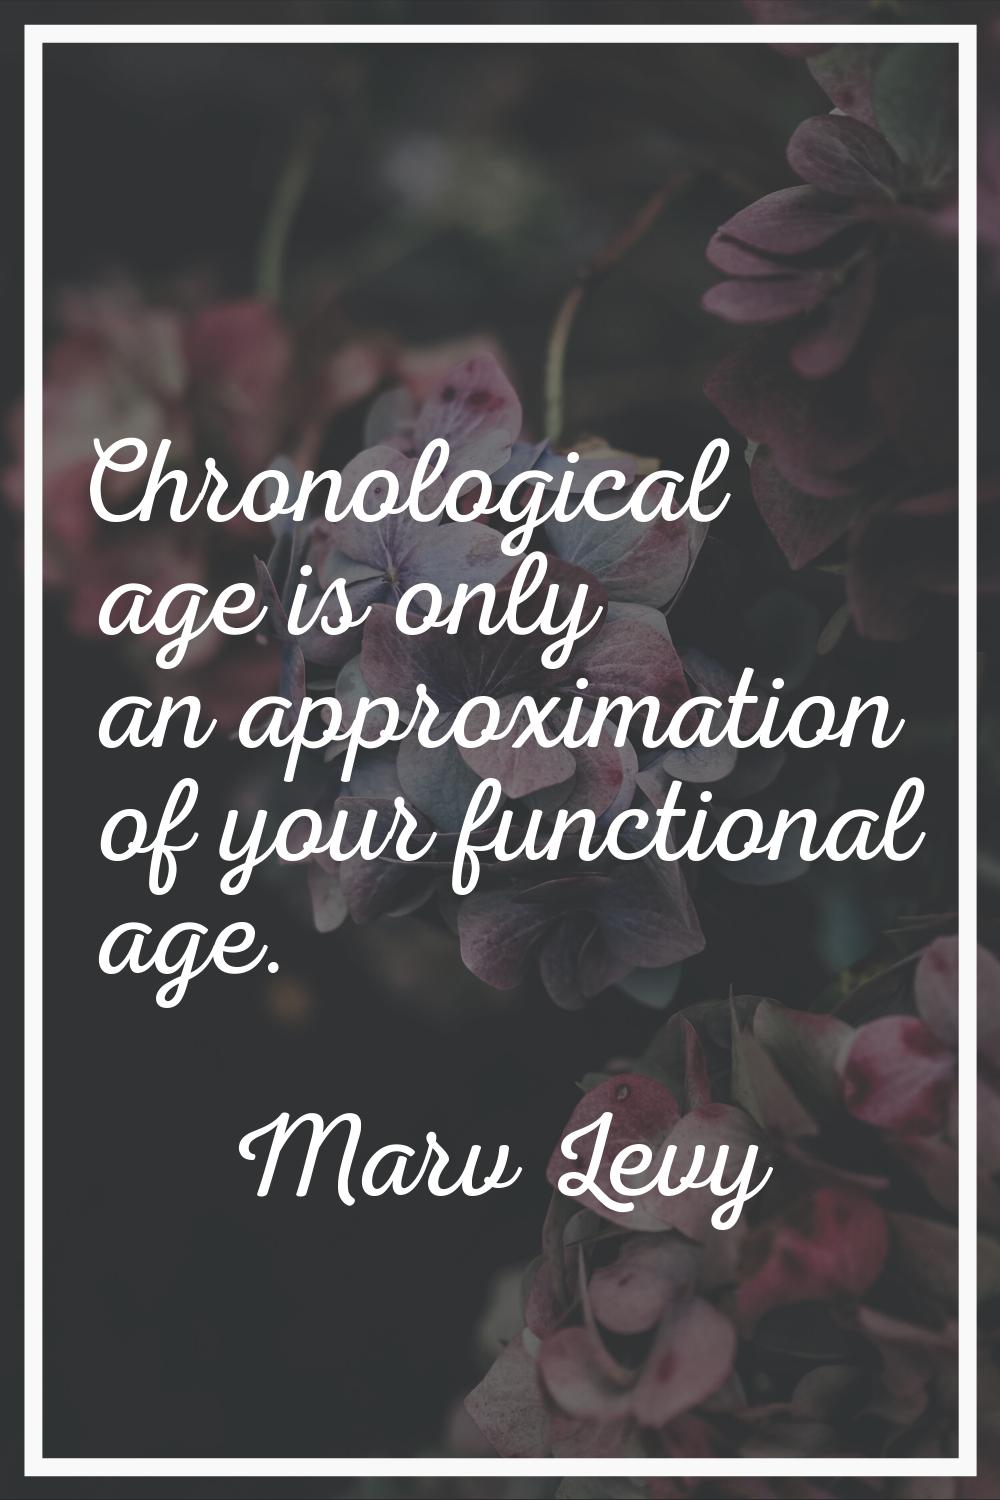 Chronological age is only an approximation of your functional age.